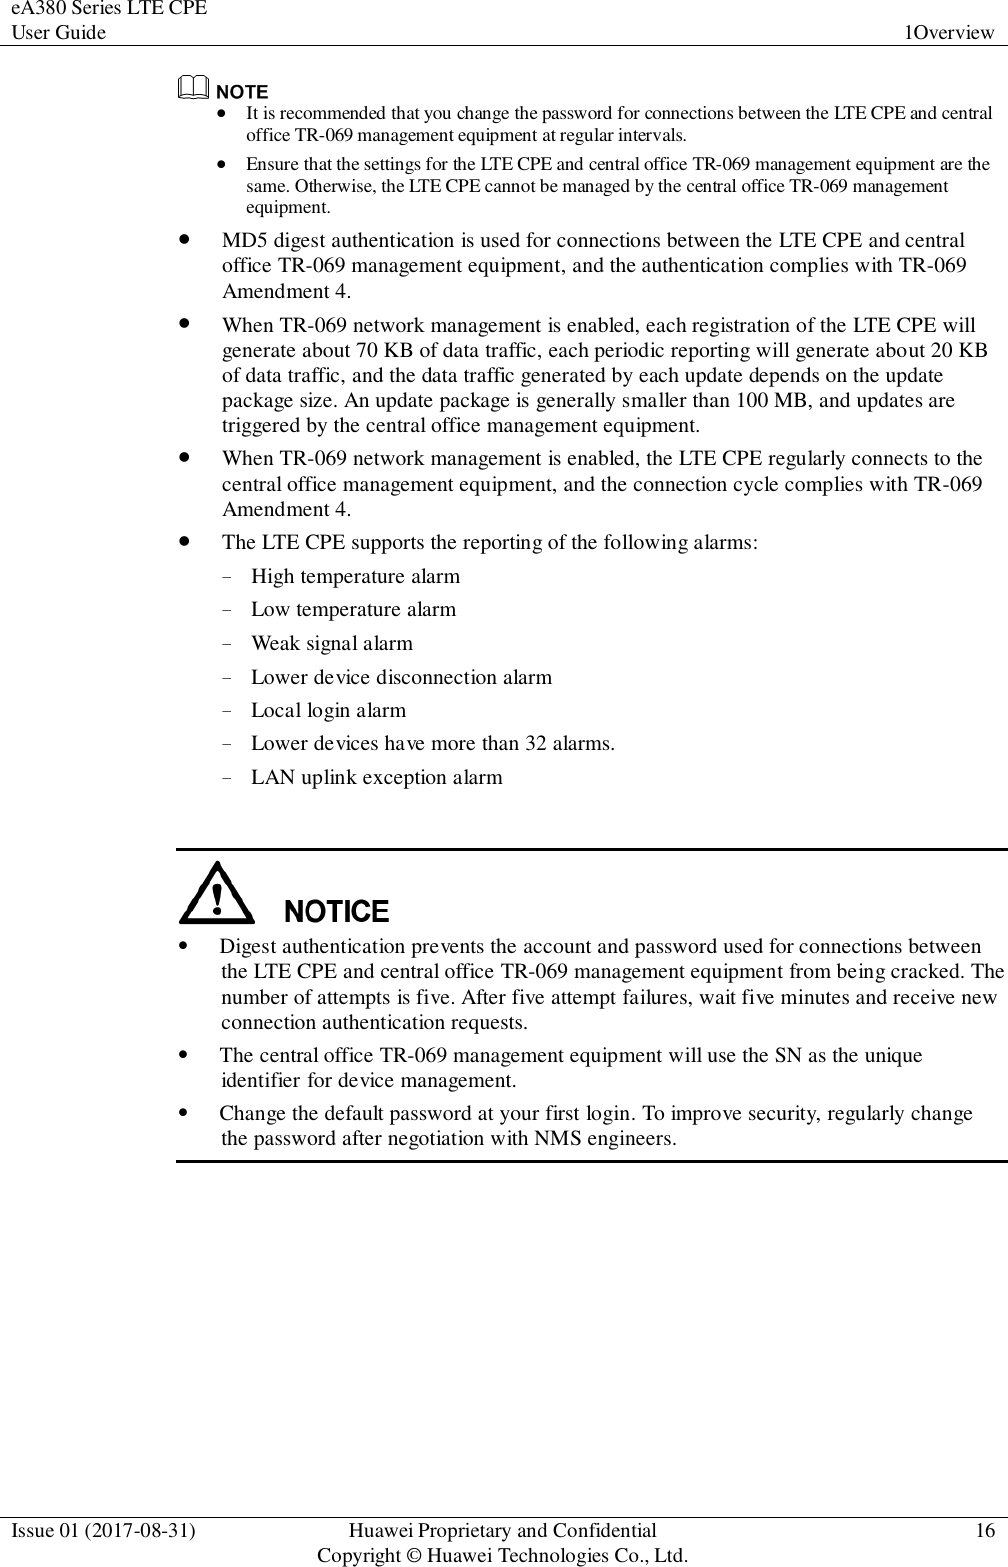 eA380 Series LTE CPE User Guide 1Overview  Issue 01 (2017-08-31) Huawei Proprietary and Confidential                                     Copyright © Huawei Technologies Co., Ltd. 16    It is recommended that you change the password for connections between the LTE CPE and central office TR-069 management equipment at regular intervals.  Ensure that the settings for the LTE CPE and central office TR-069 management equipment are the same. Otherwise, the LTE CPE cannot be managed by the central office TR-069 management equipment.  MD5 digest authentication is used for connections between the LTE CPE and central office TR-069 management equipment, and the authentication complies with TR-069 Amendment 4.  When TR-069 network management is enabled, each registration of the LTE CPE will generate about 70 KB of data traffic, each periodic reporting will generate about 20 KB of data traffic, and the data traffic generated by each update depends on the update package size. An update package is generally smaller than 100 MB, and updates are triggered by the central office management equipment.    When TR-069 network management is enabled, the LTE CPE regularly connects to the central office management equipment, and the connection cycle complies with TR-069 Amendment 4.  The LTE CPE supports the reporting of the following alarms: − High temperature alarm − Low temperature alarm − Weak signal alarm − Lower device disconnection alarm − Local login alarm − Lower devices have more than 32 alarms. − LAN uplink exception alarm    Digest authentication prevents the account and password used for connections between the LTE CPE and central office TR-069 management equipment from being cracked. The number of attempts is five. After five attempt failures, wait five minutes and receive new connection authentication requests.  The central office TR-069 management equipment will use the SN as the unique identifier for device management.  Change the default password at your first login. To improve security, regularly change the password after negotiation with NMS engineers.  